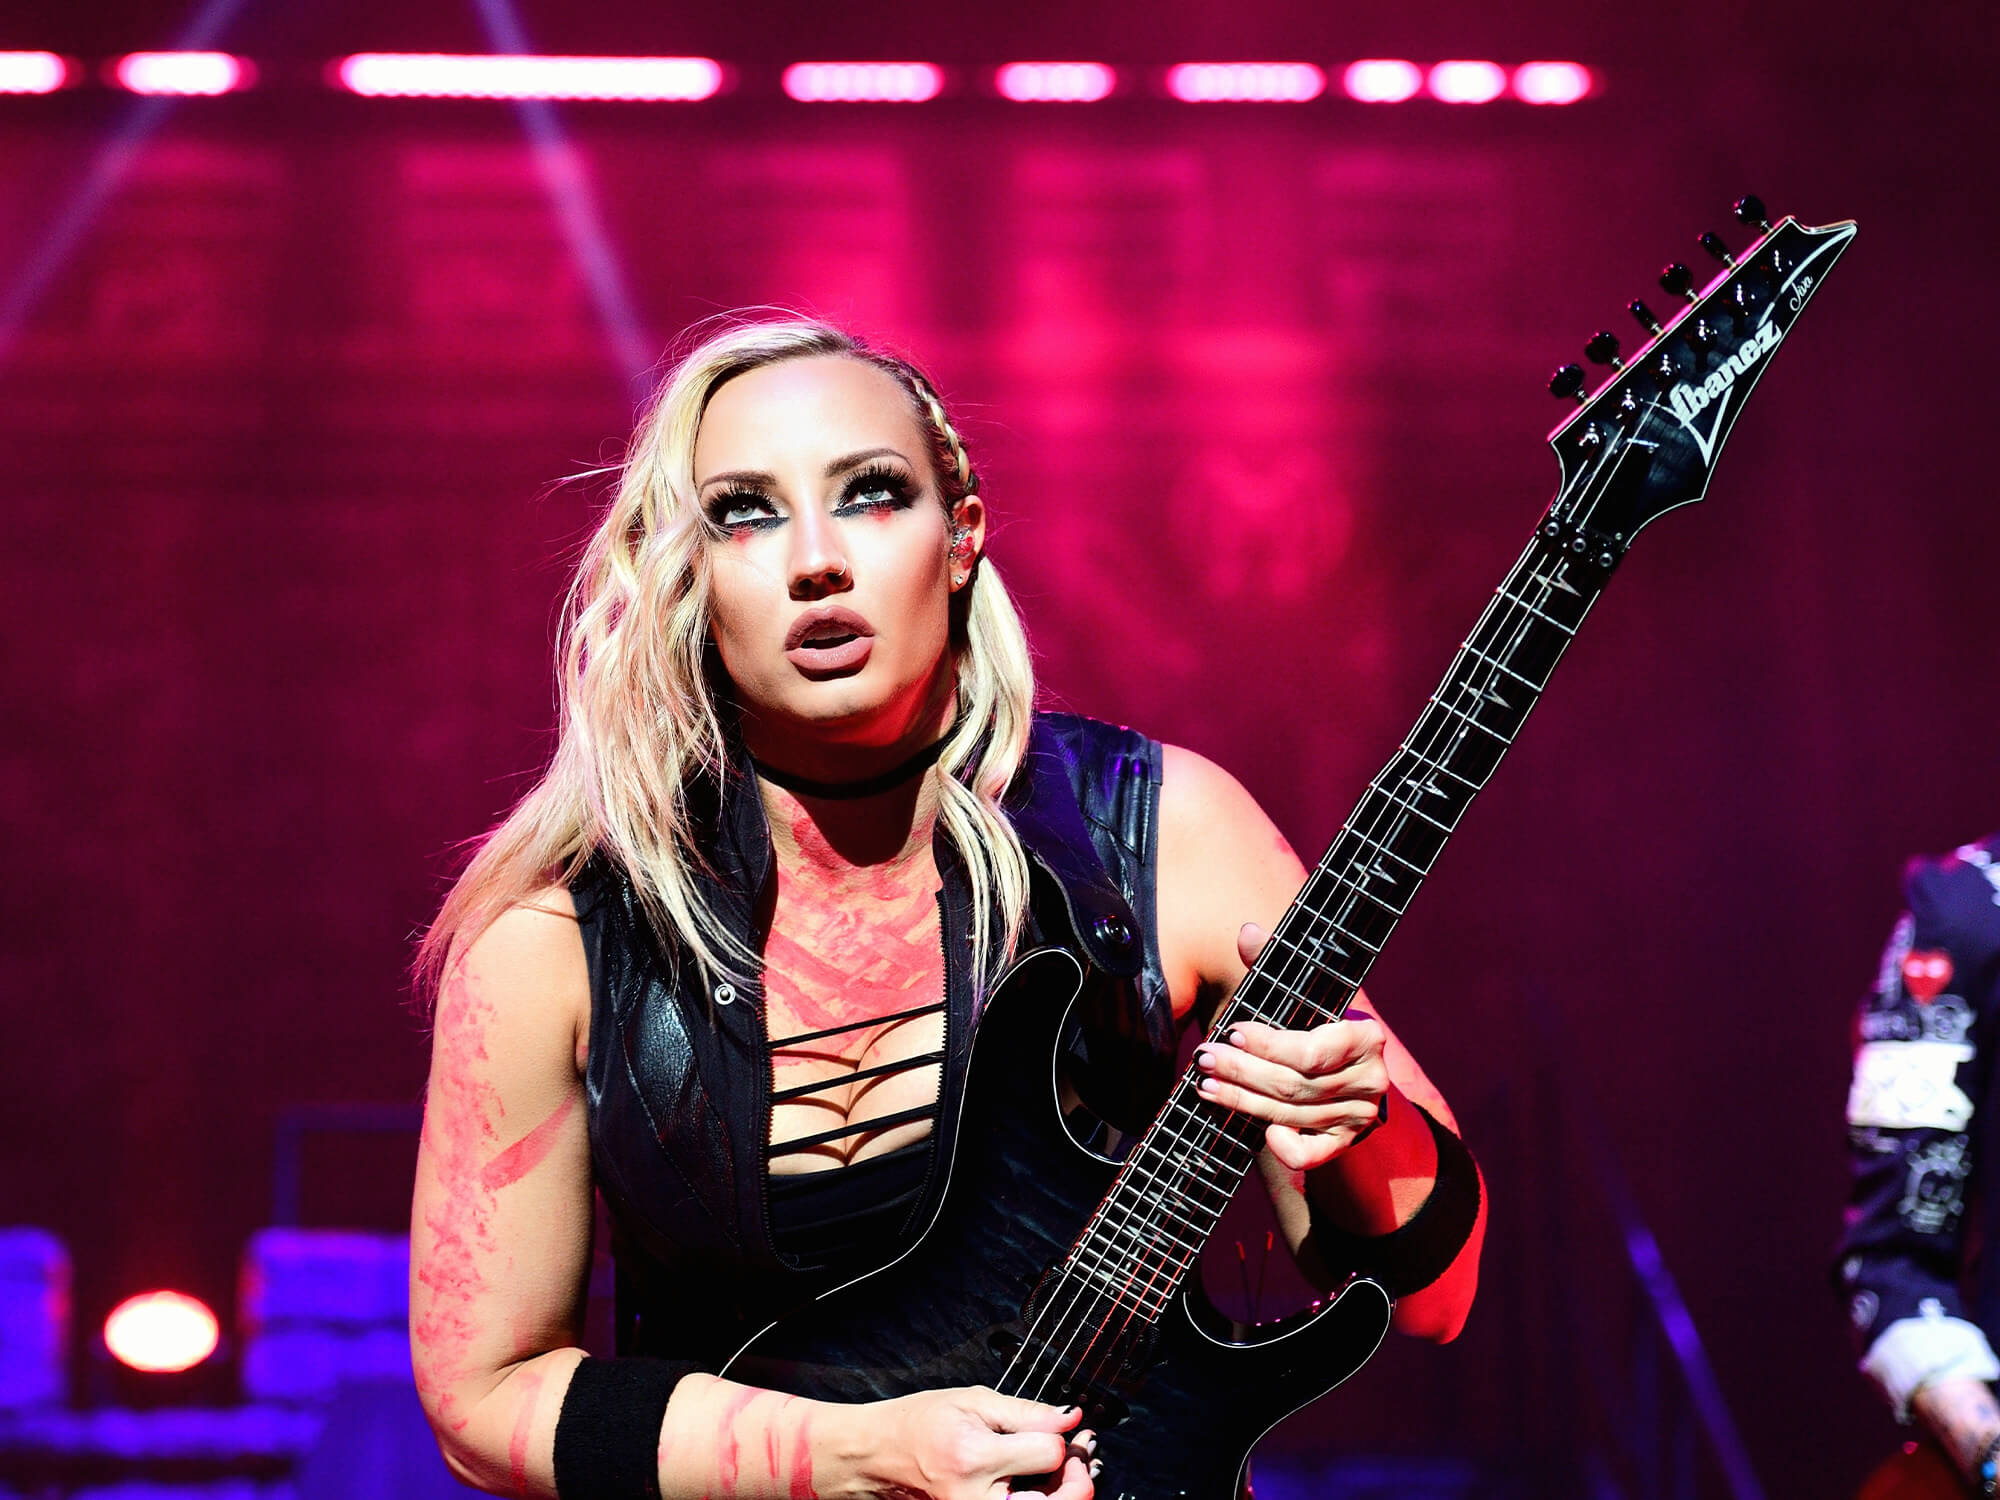 Nita Strauss on stage, she is crouched and playing her Ibanez electric guitar. She's looking forwards out into the audience.